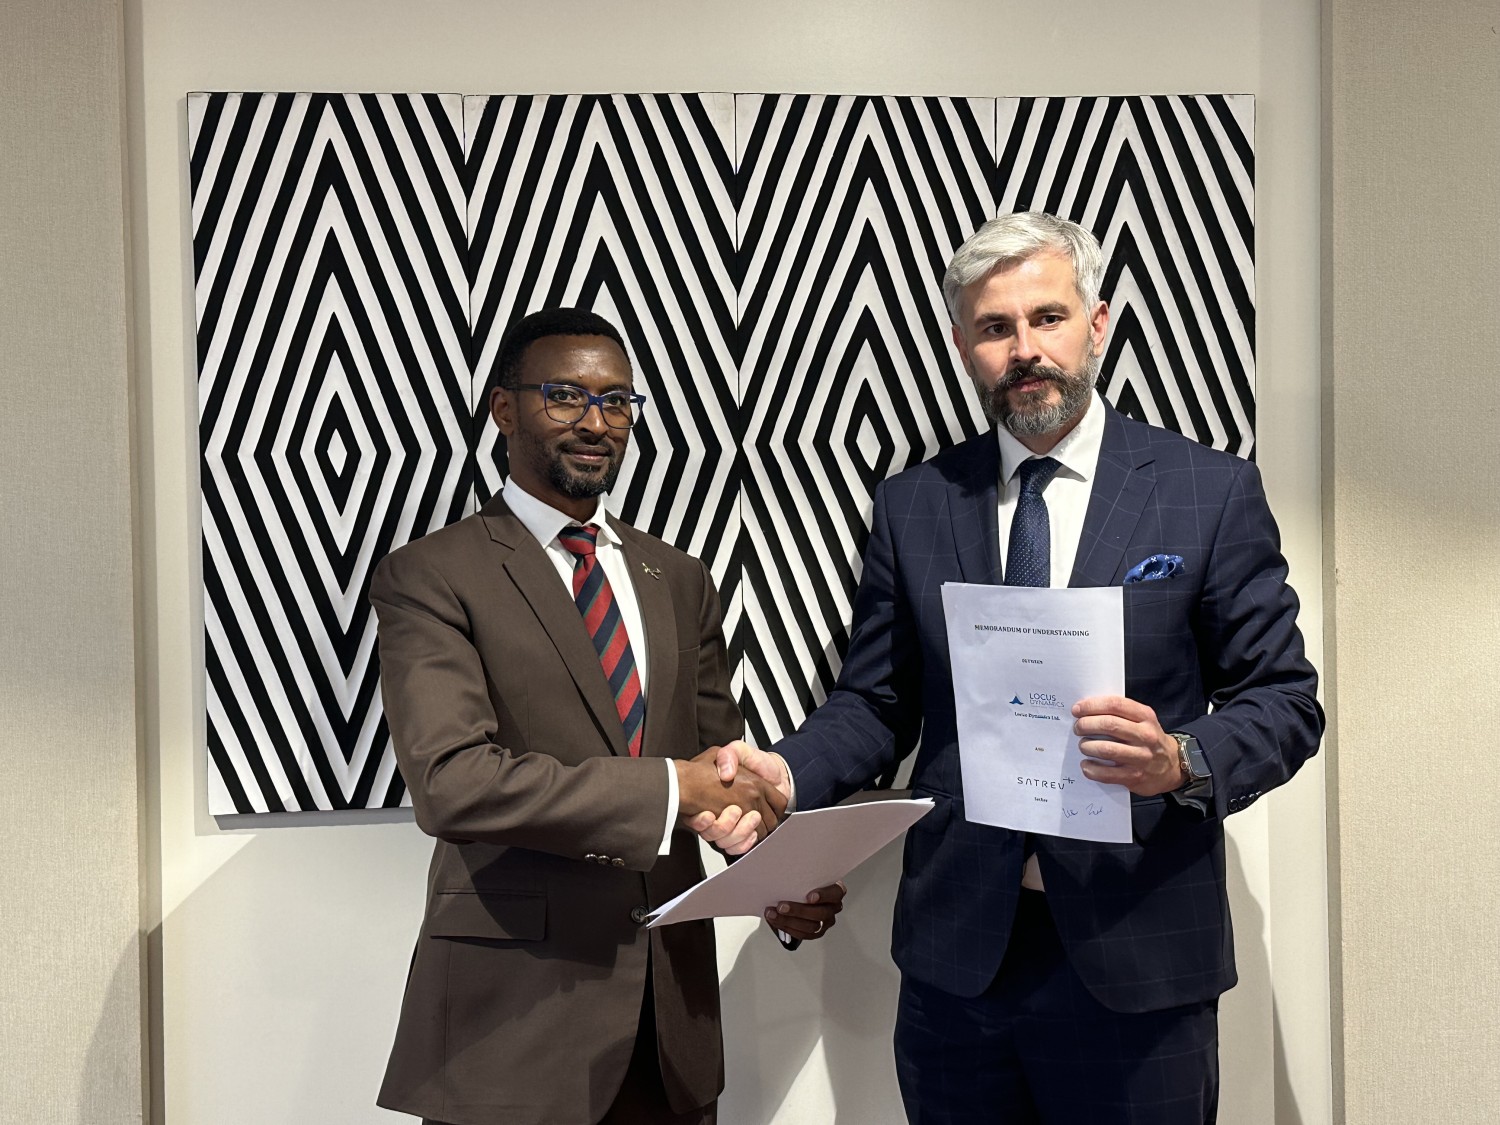 SatRev and Locus Dynamics Sign MoU for Joint Development of Earth Observation Capabilities in Rwanda